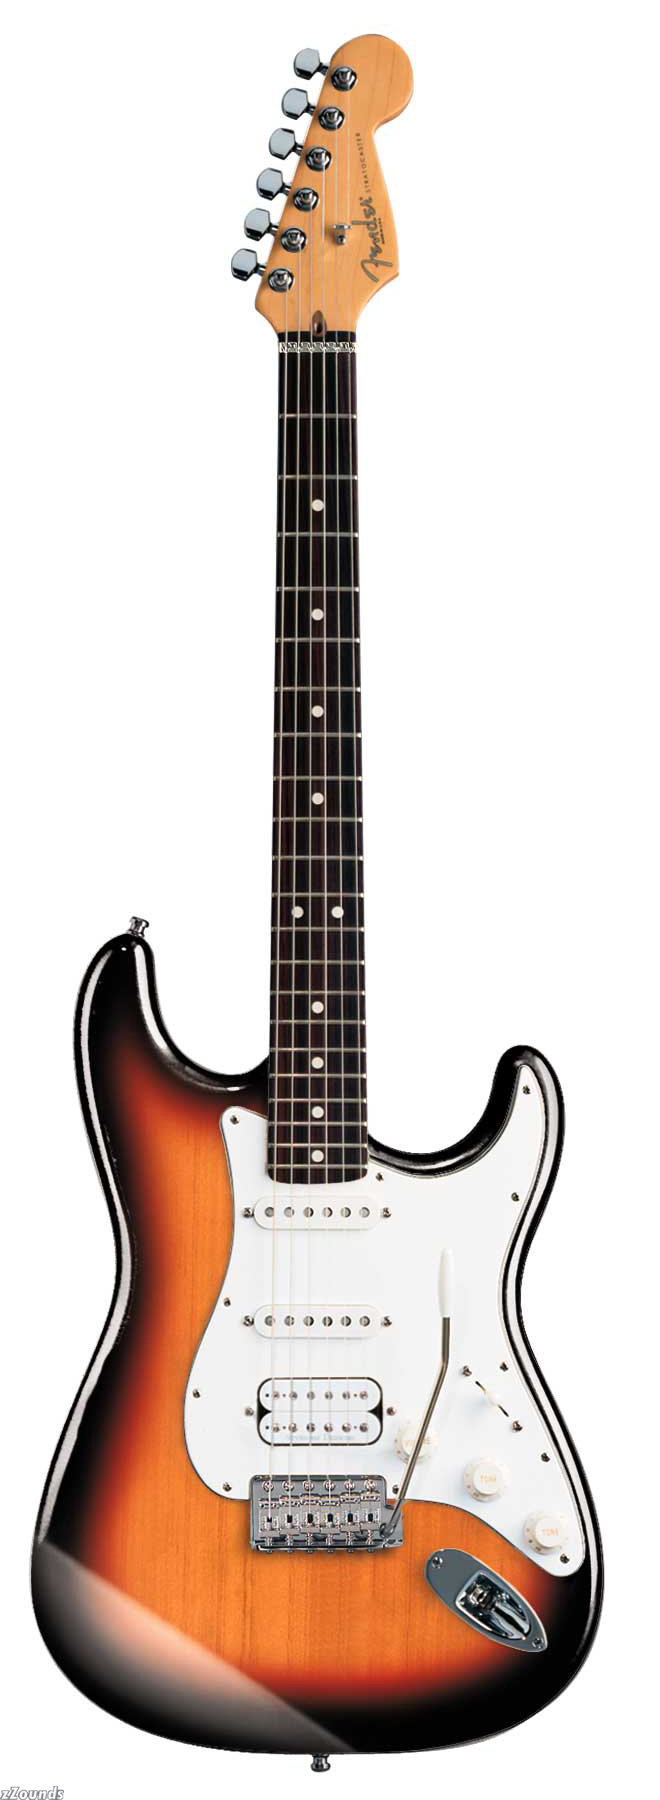 american deluxe stratocaster hss